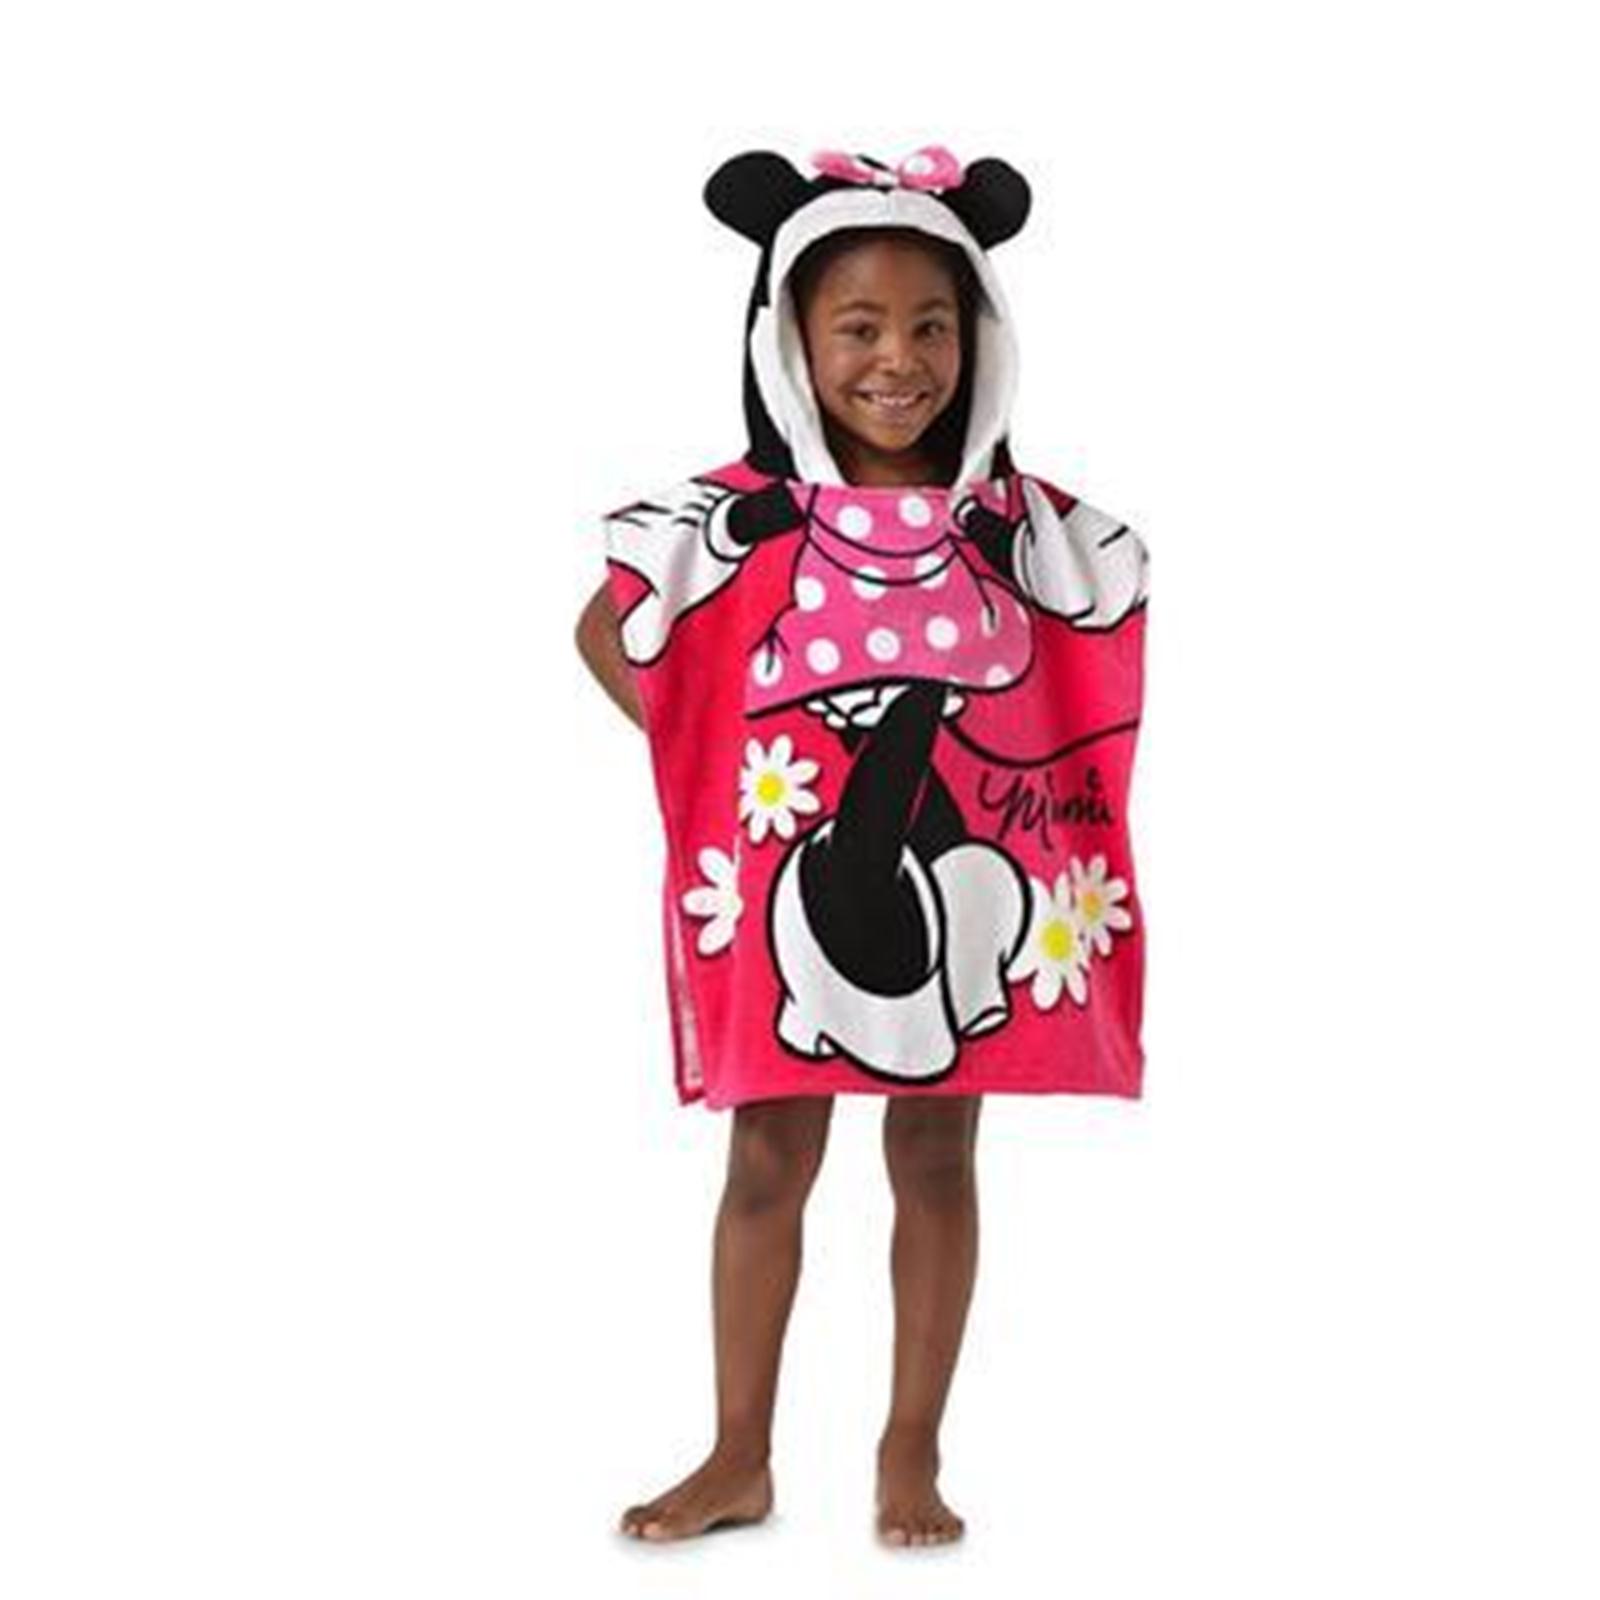 UPC 032281687397 product image for Disney Girl's Hooded Towel Poncho - Minnie Mouse | upcitemdb.com